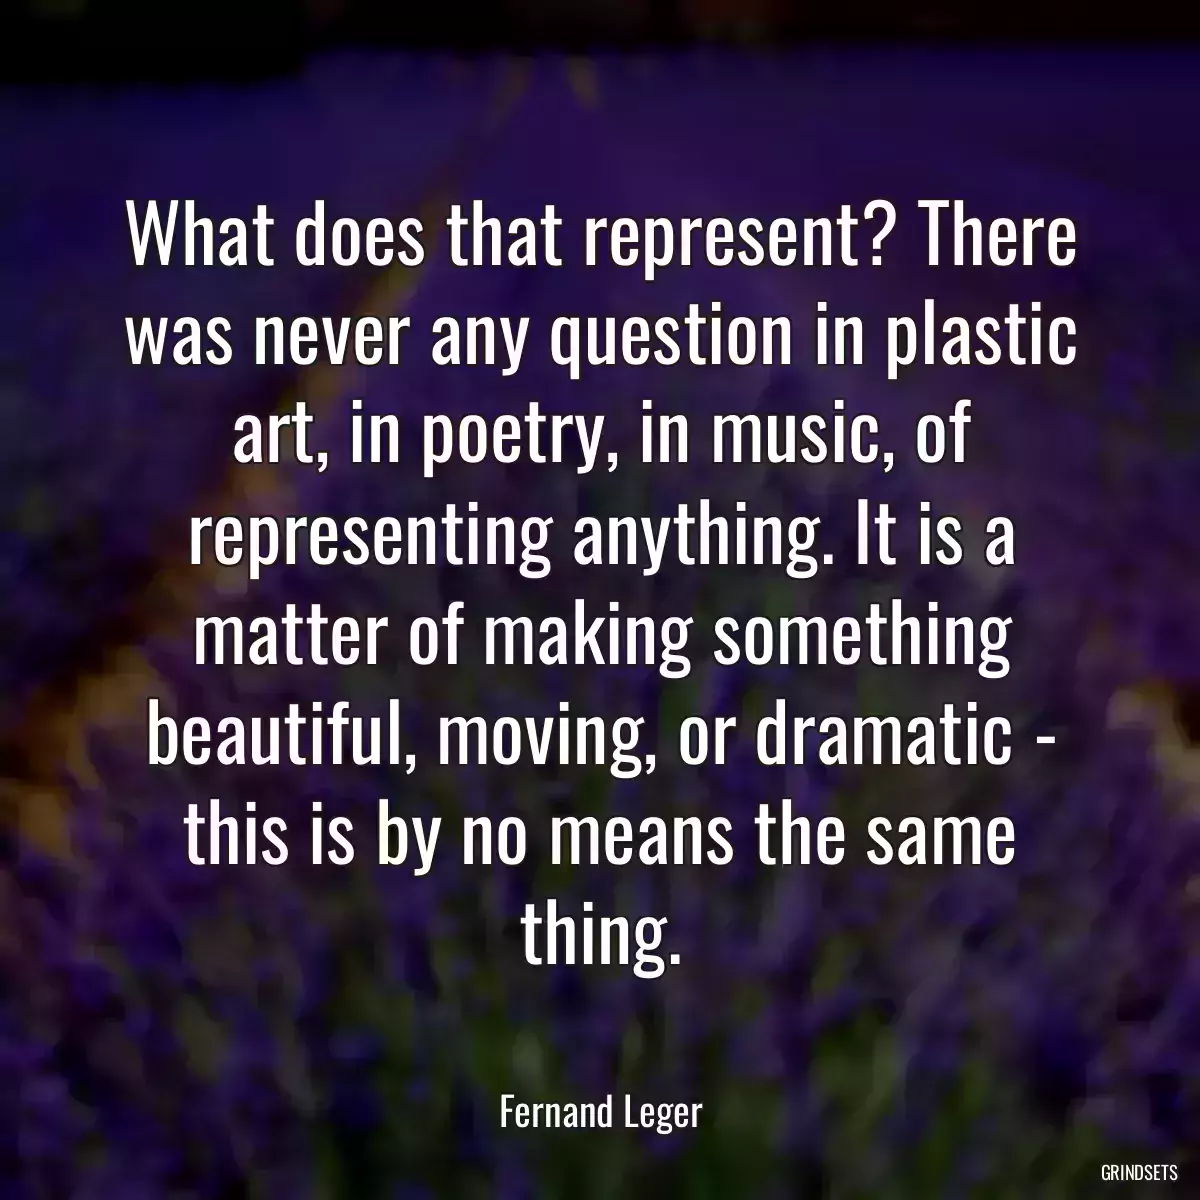 What does that represent? There was never any question in plastic art, in poetry, in music, of representing anything. It is a matter of making something beautiful, moving, or dramatic - this is by no means the same thing.